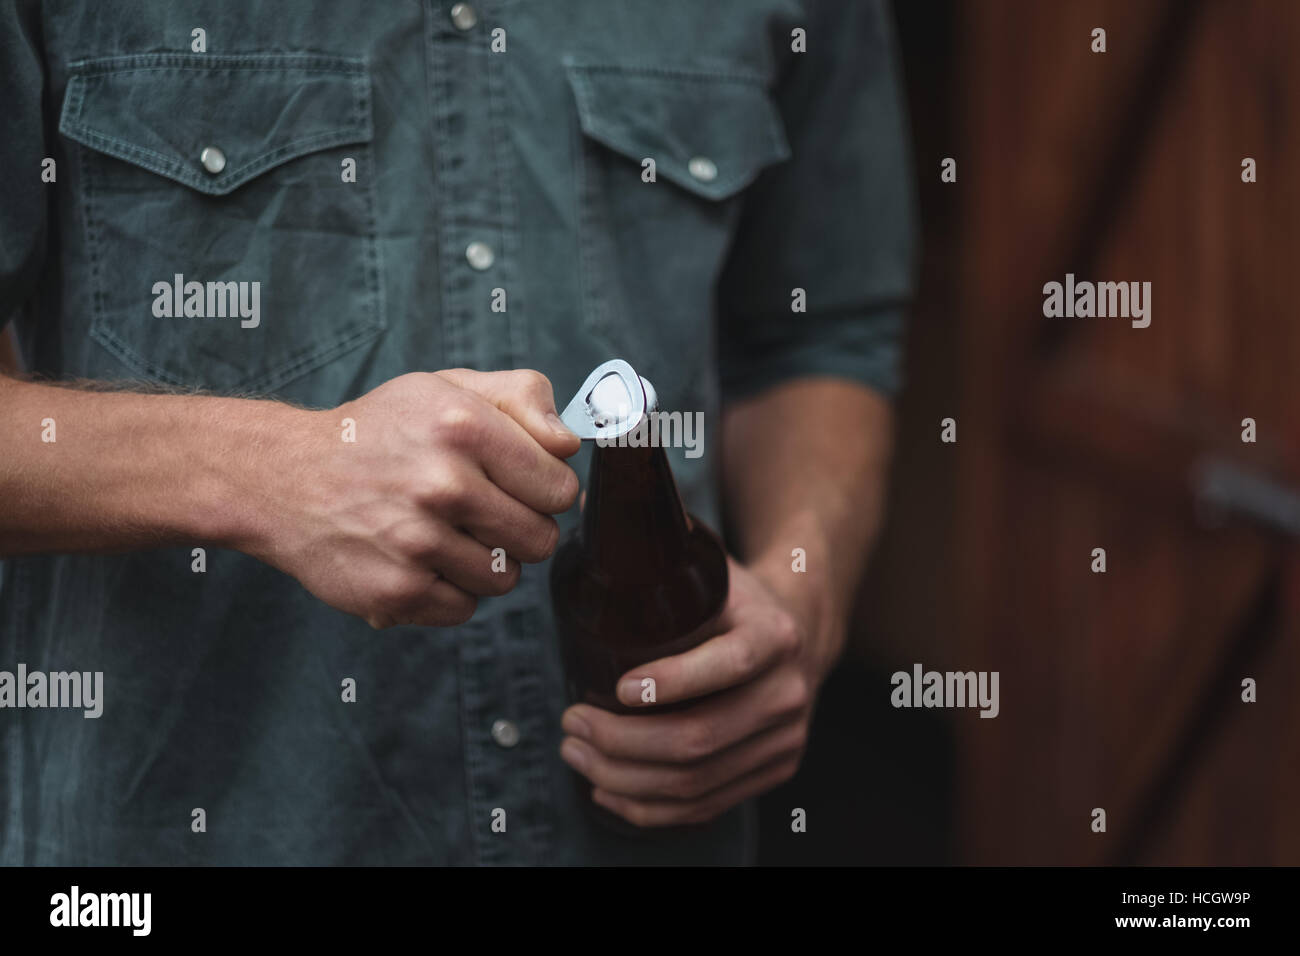 Man opening a beer bottle Stock Photo